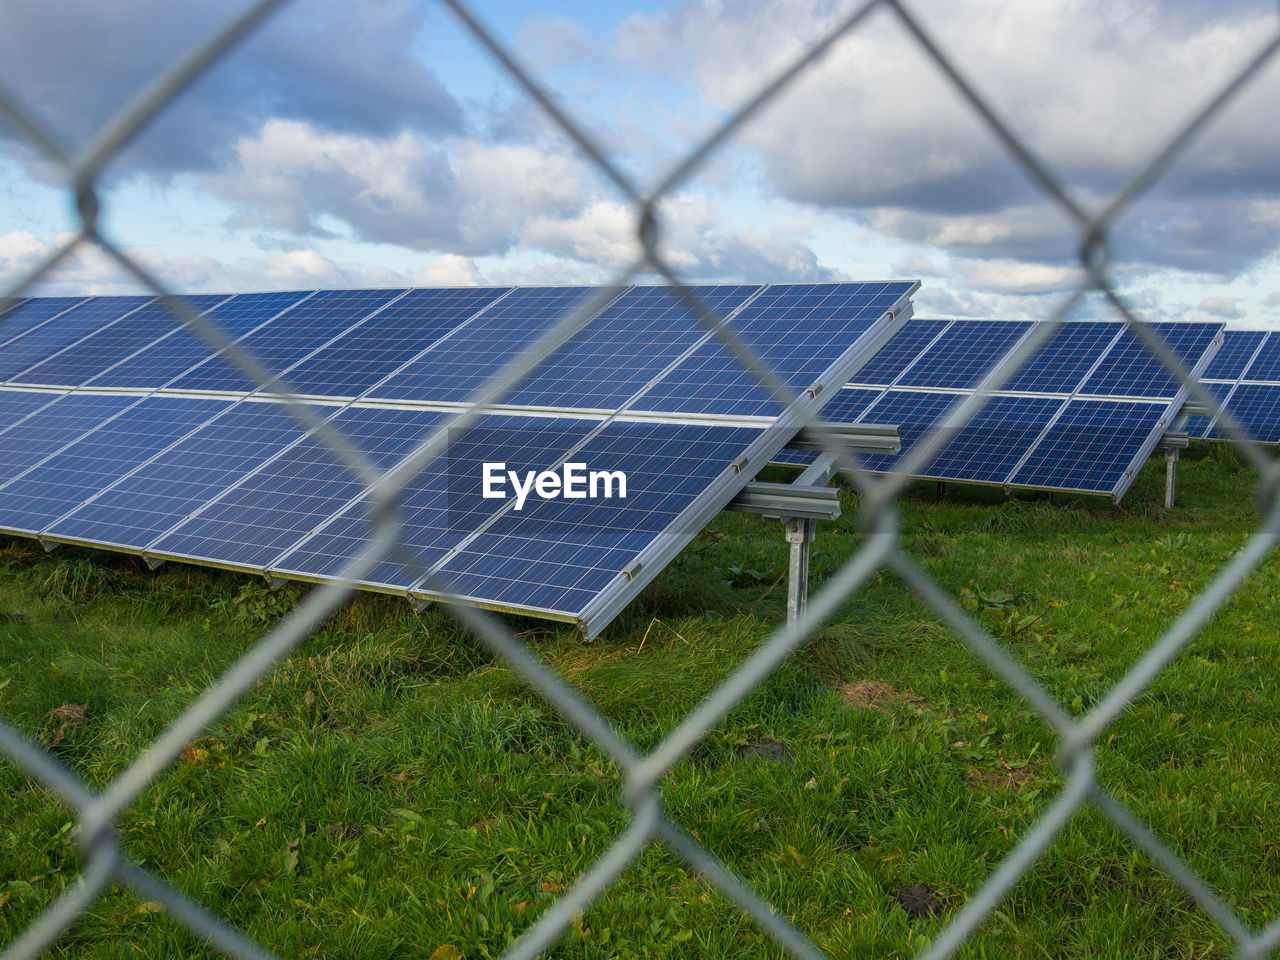 Low angle view of solar panel farm behind metal fence on field against sky, germany